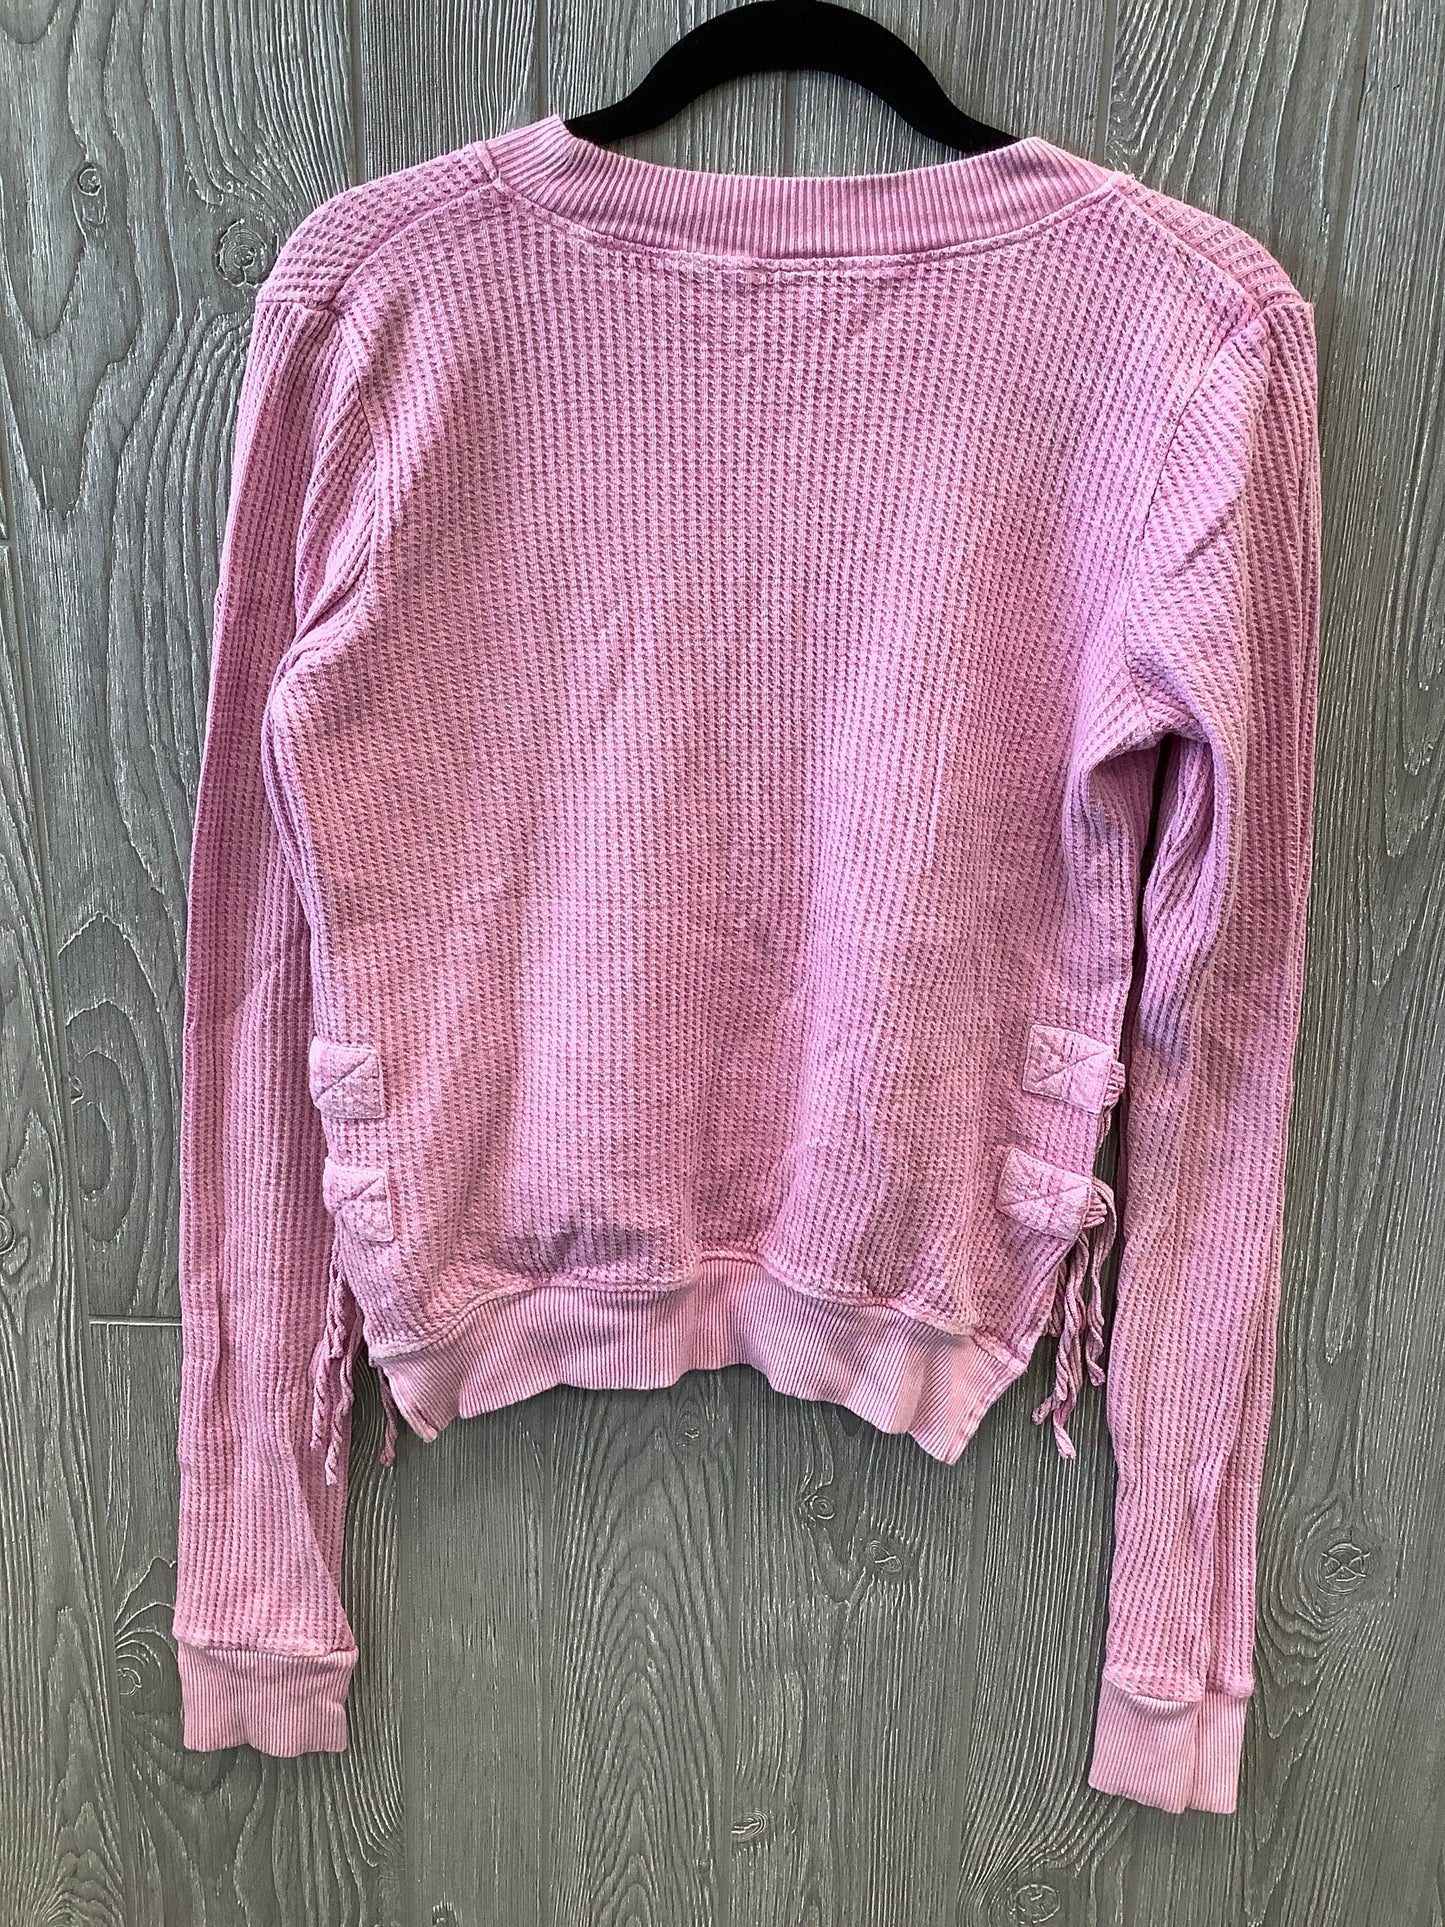 Pink Top Long Sleeve Free People, Size M